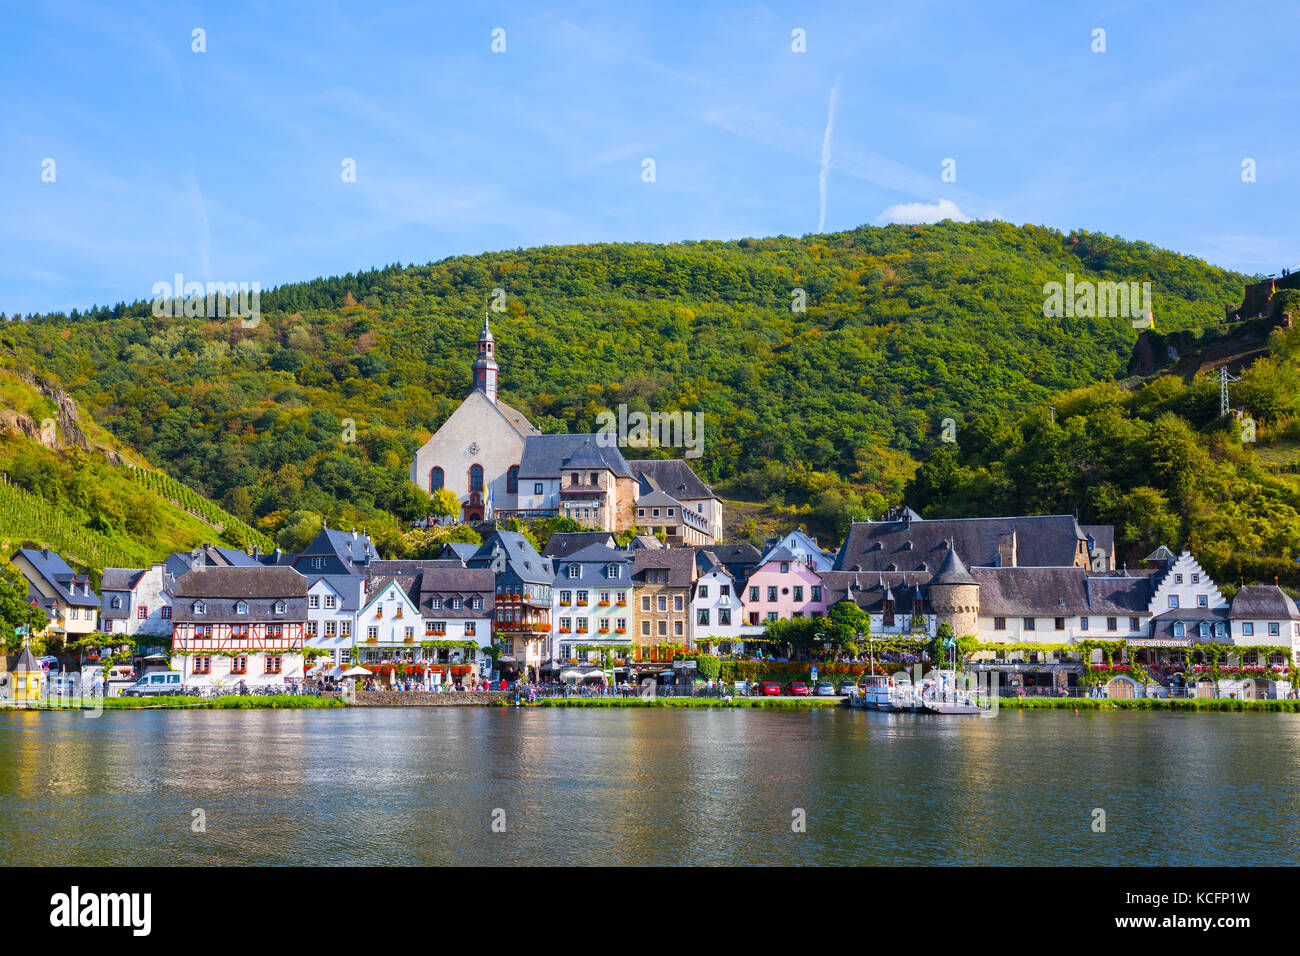 Beilstein is an Ortsgemeinde – a municipality belonging to a Verbandsgemeinde, a kind of collective municipality – in the Cochem-Zell district in Rhin Stock Photo